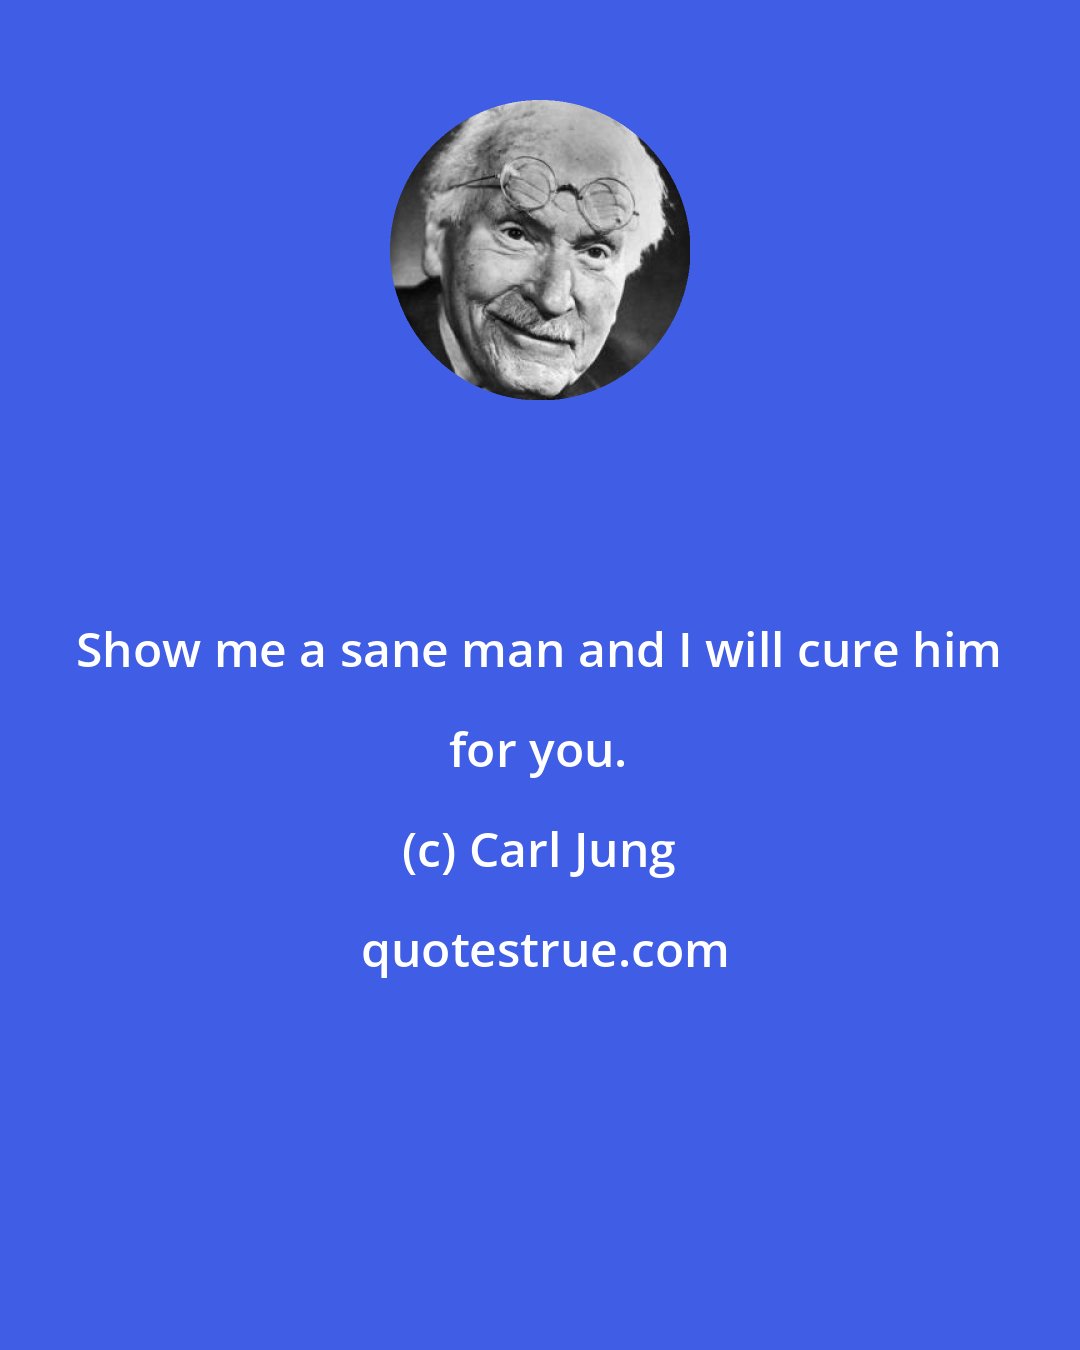 Carl Jung: Show me a sane man and I will cure him for you.